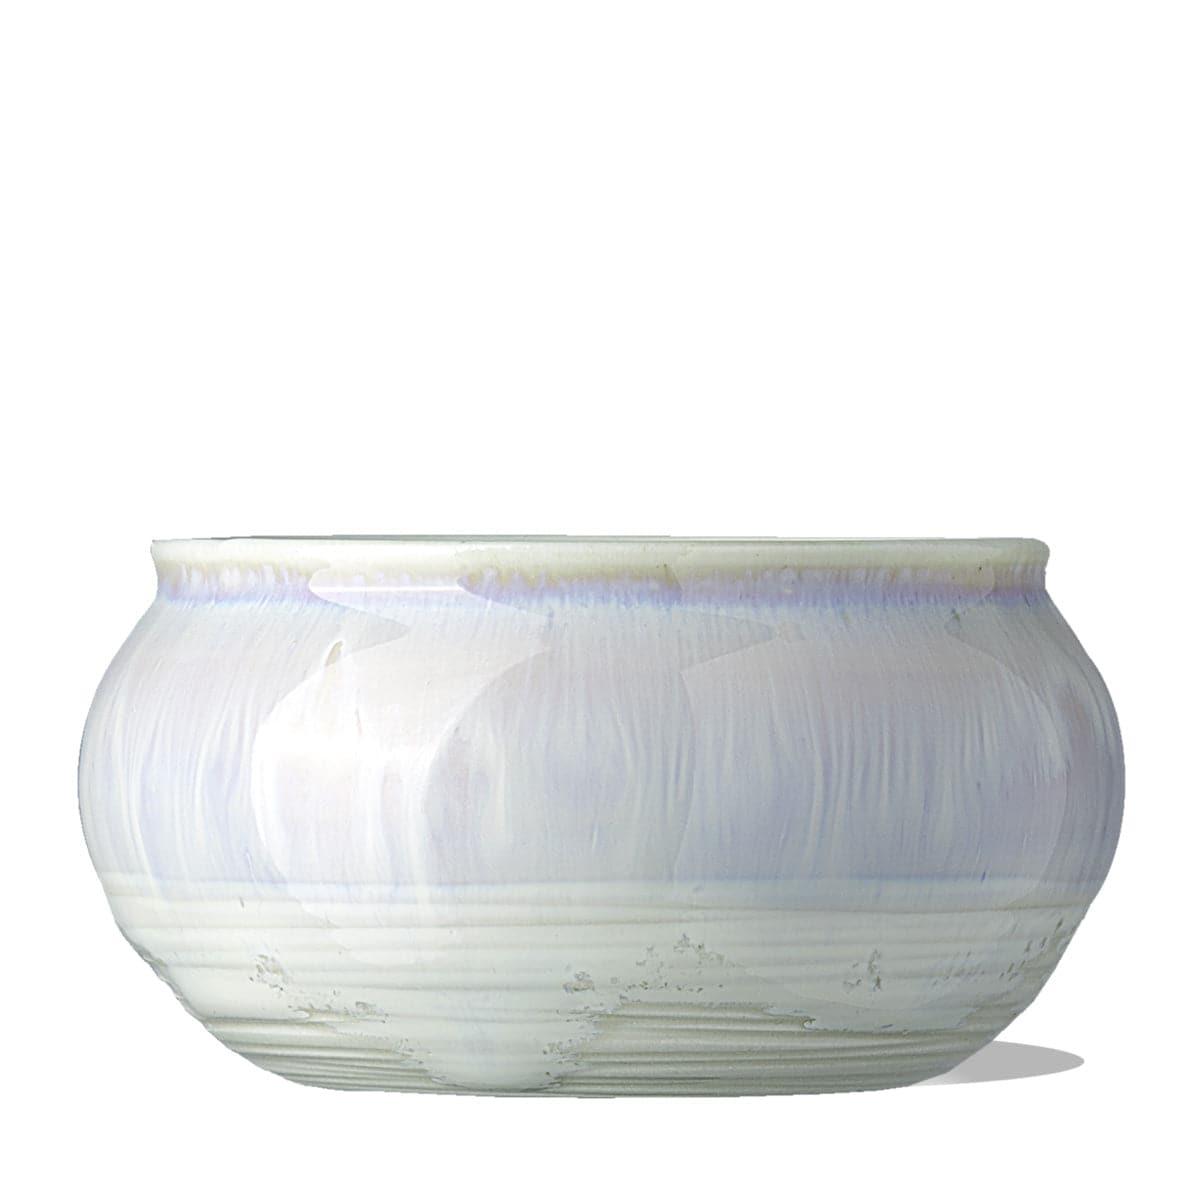 a clean shot of the IN YOUR FACE BOWL, a porcelain, artisan-made ceramic treatment bowl. It is an iridescent white color.